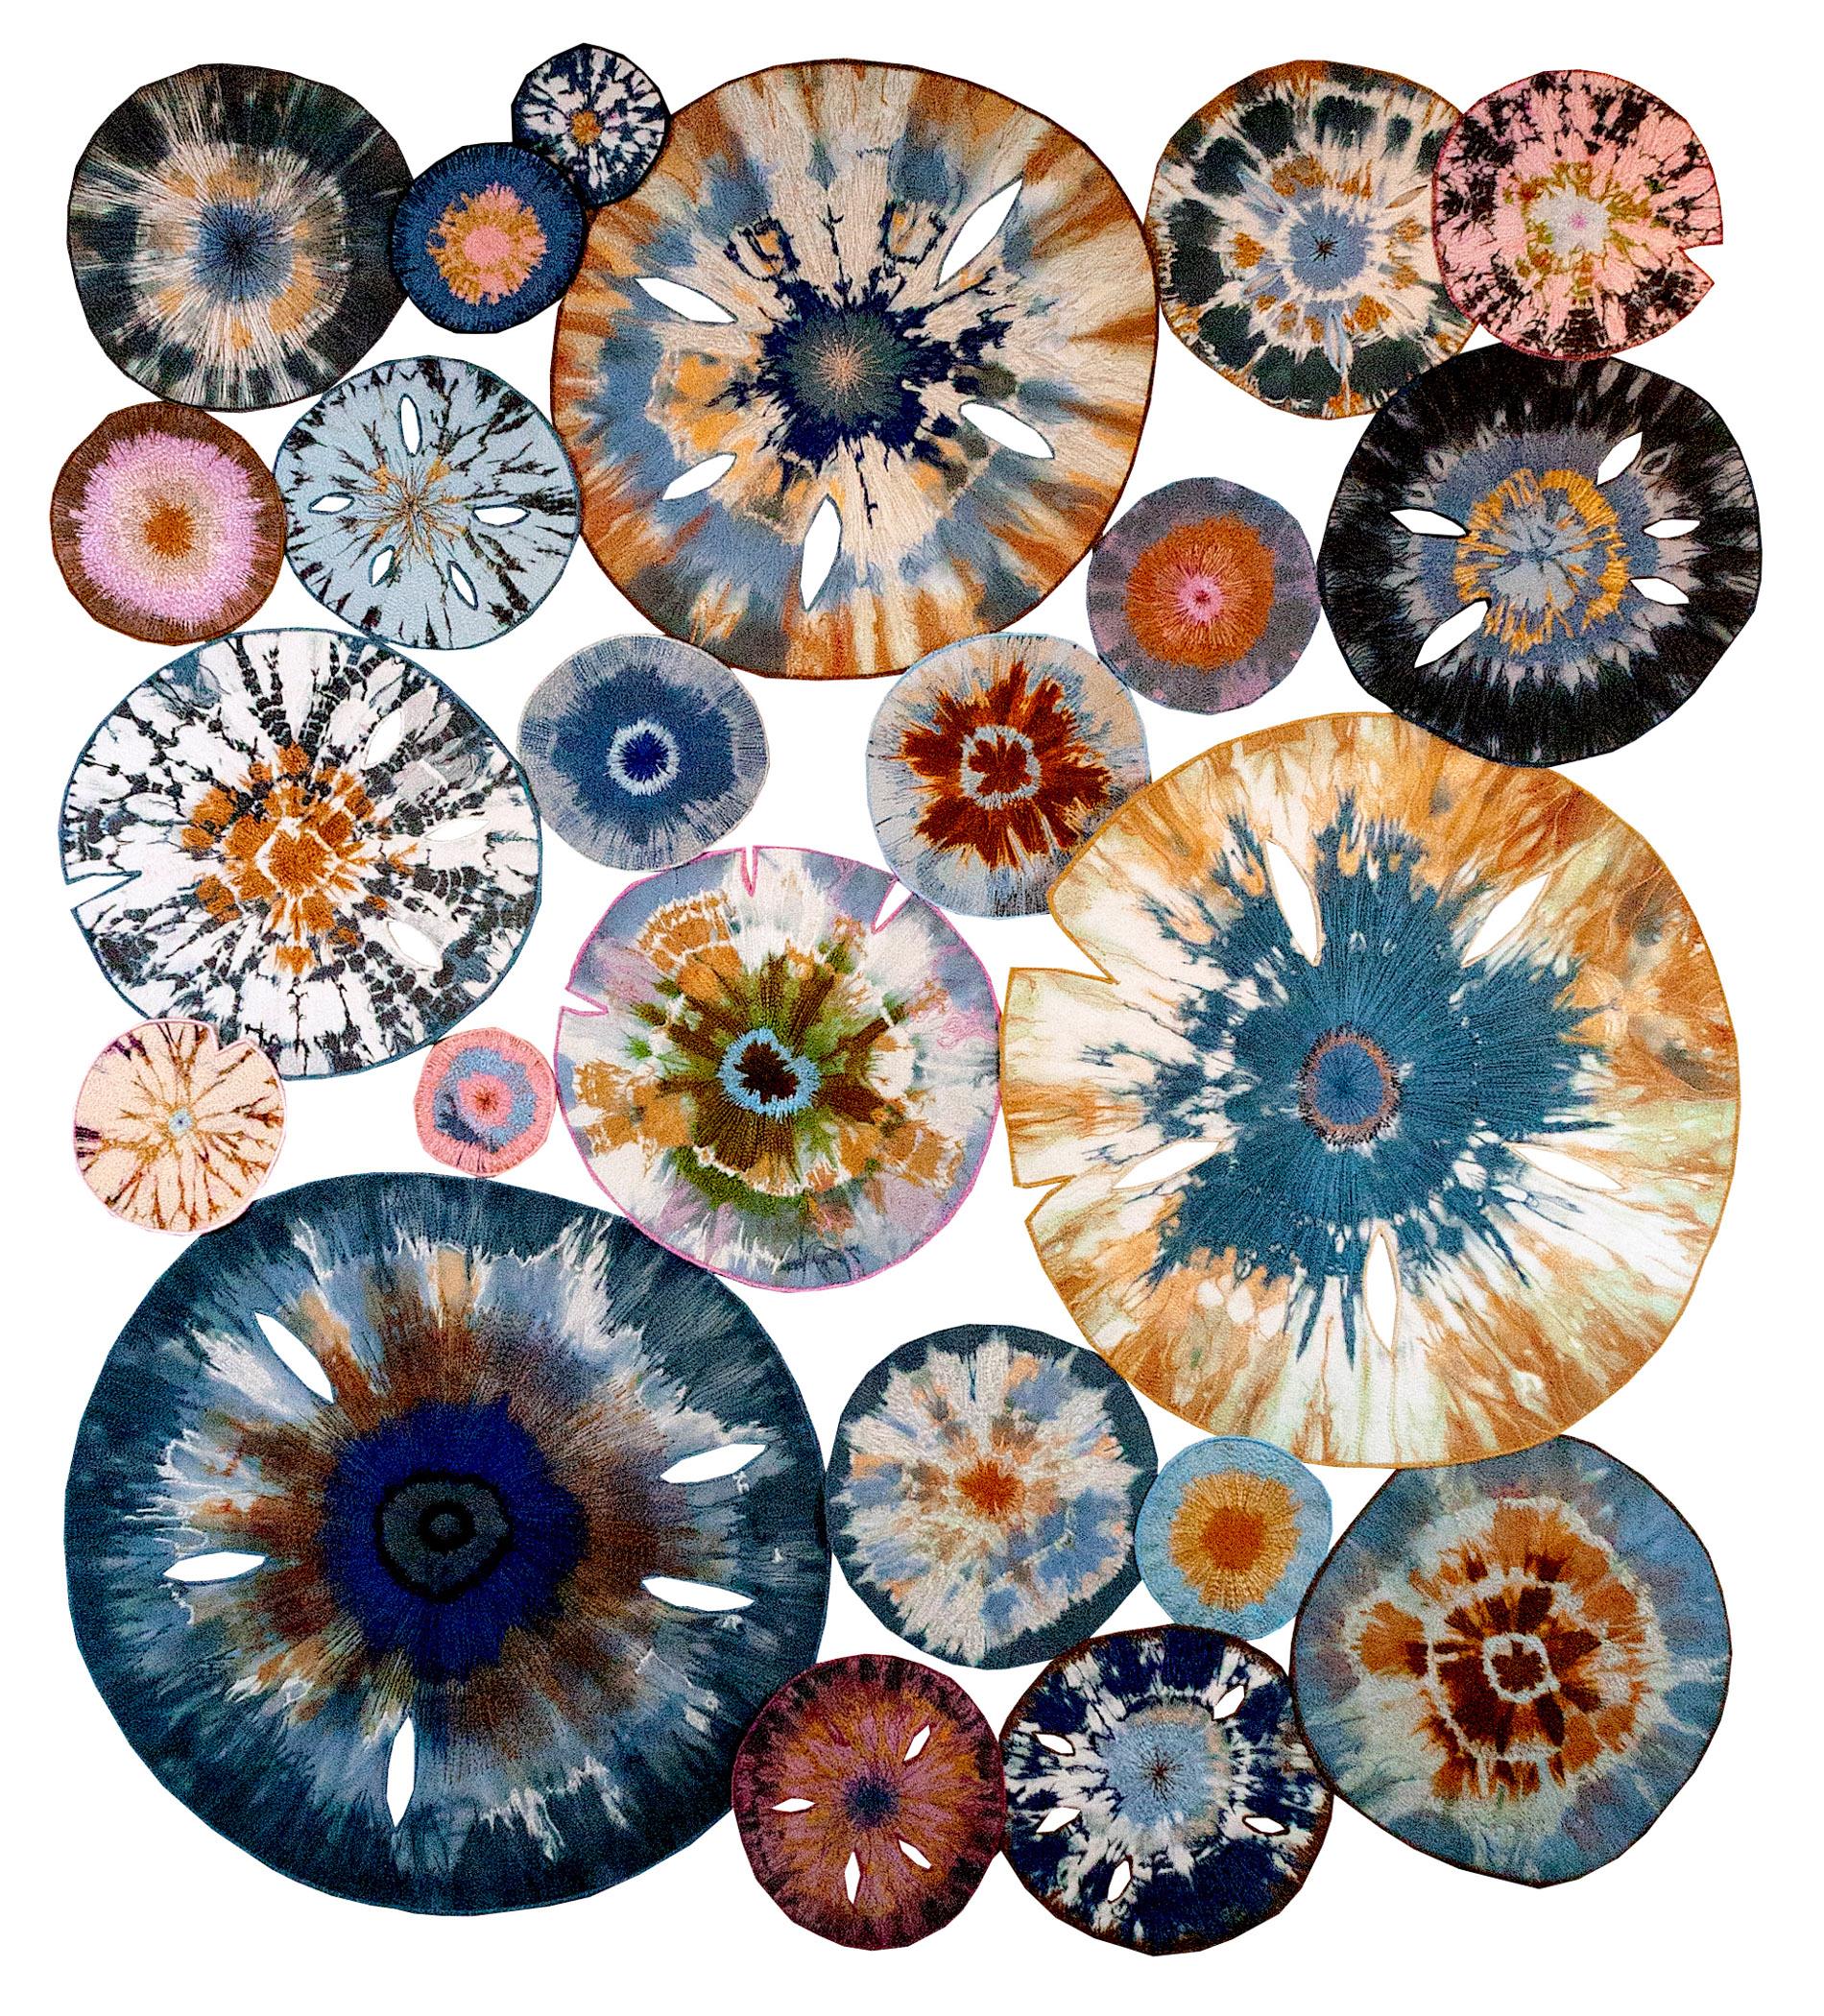 Diana S Fox - Gifts from the Universe Series - Water - Sand Dollars